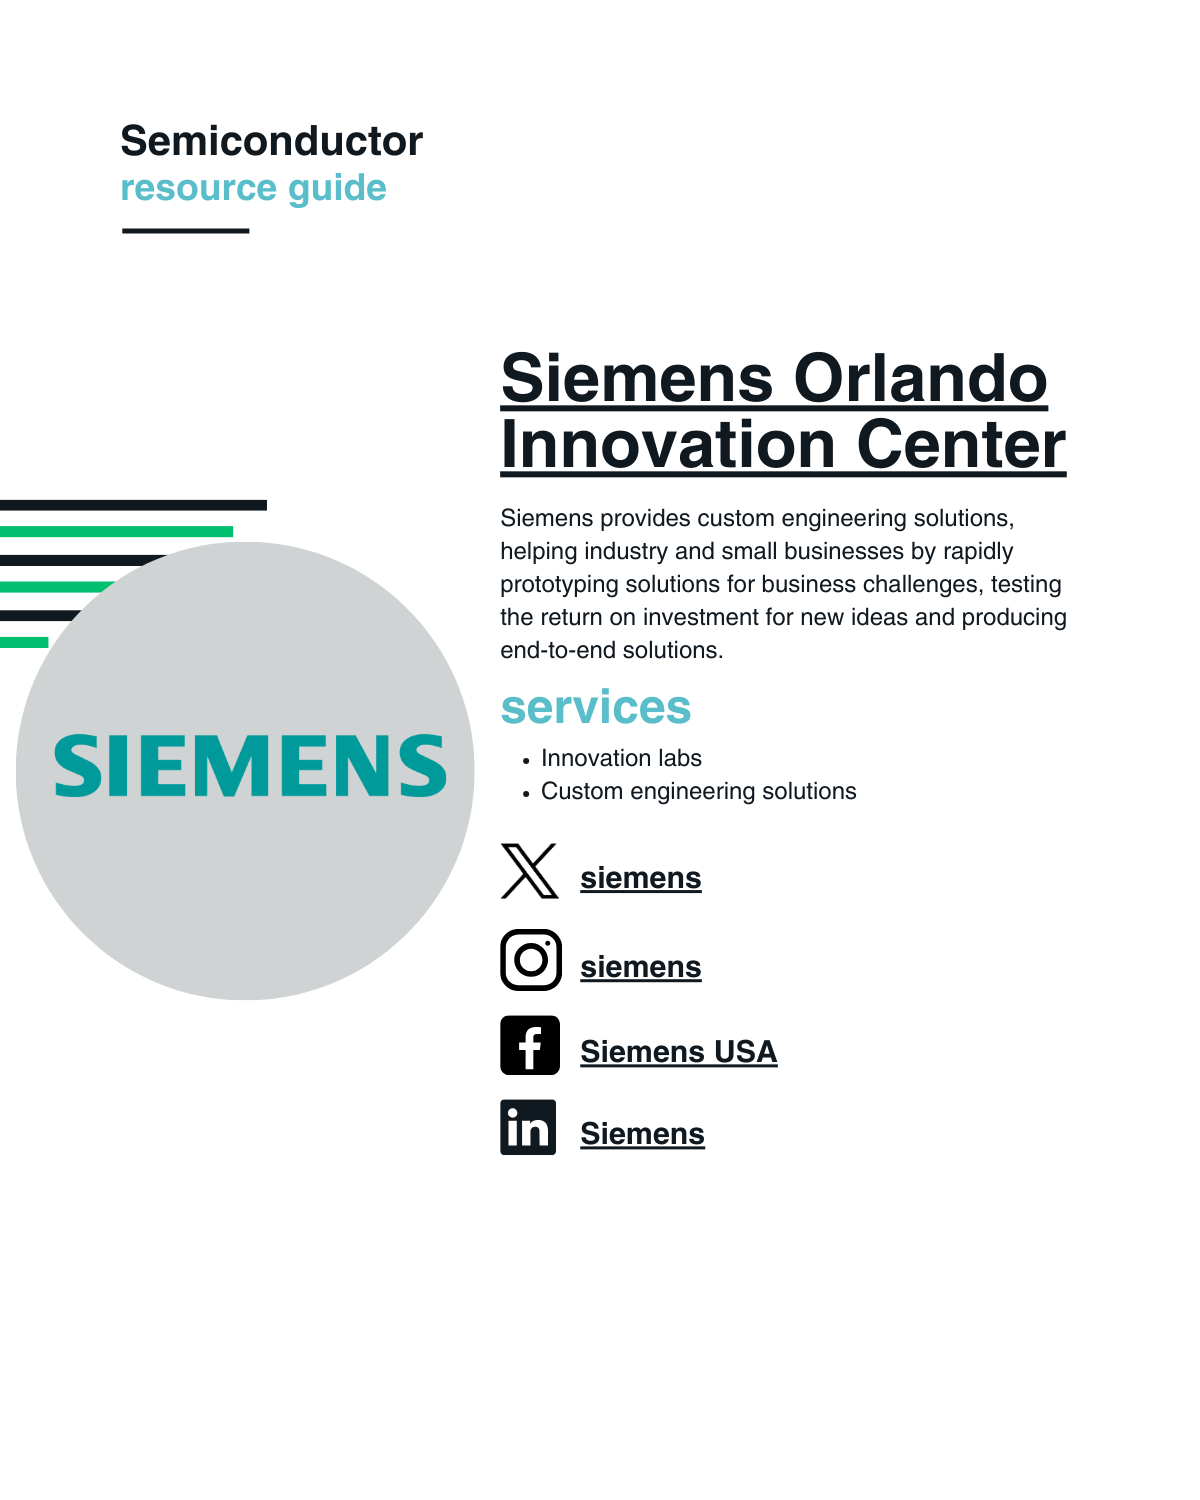 Siemens provides custom engineering solutions, helping industry and small businesses by rapidly prototyping solutions for business challenges, testing the return on investment for new ideas and producing end-to-end solutions.